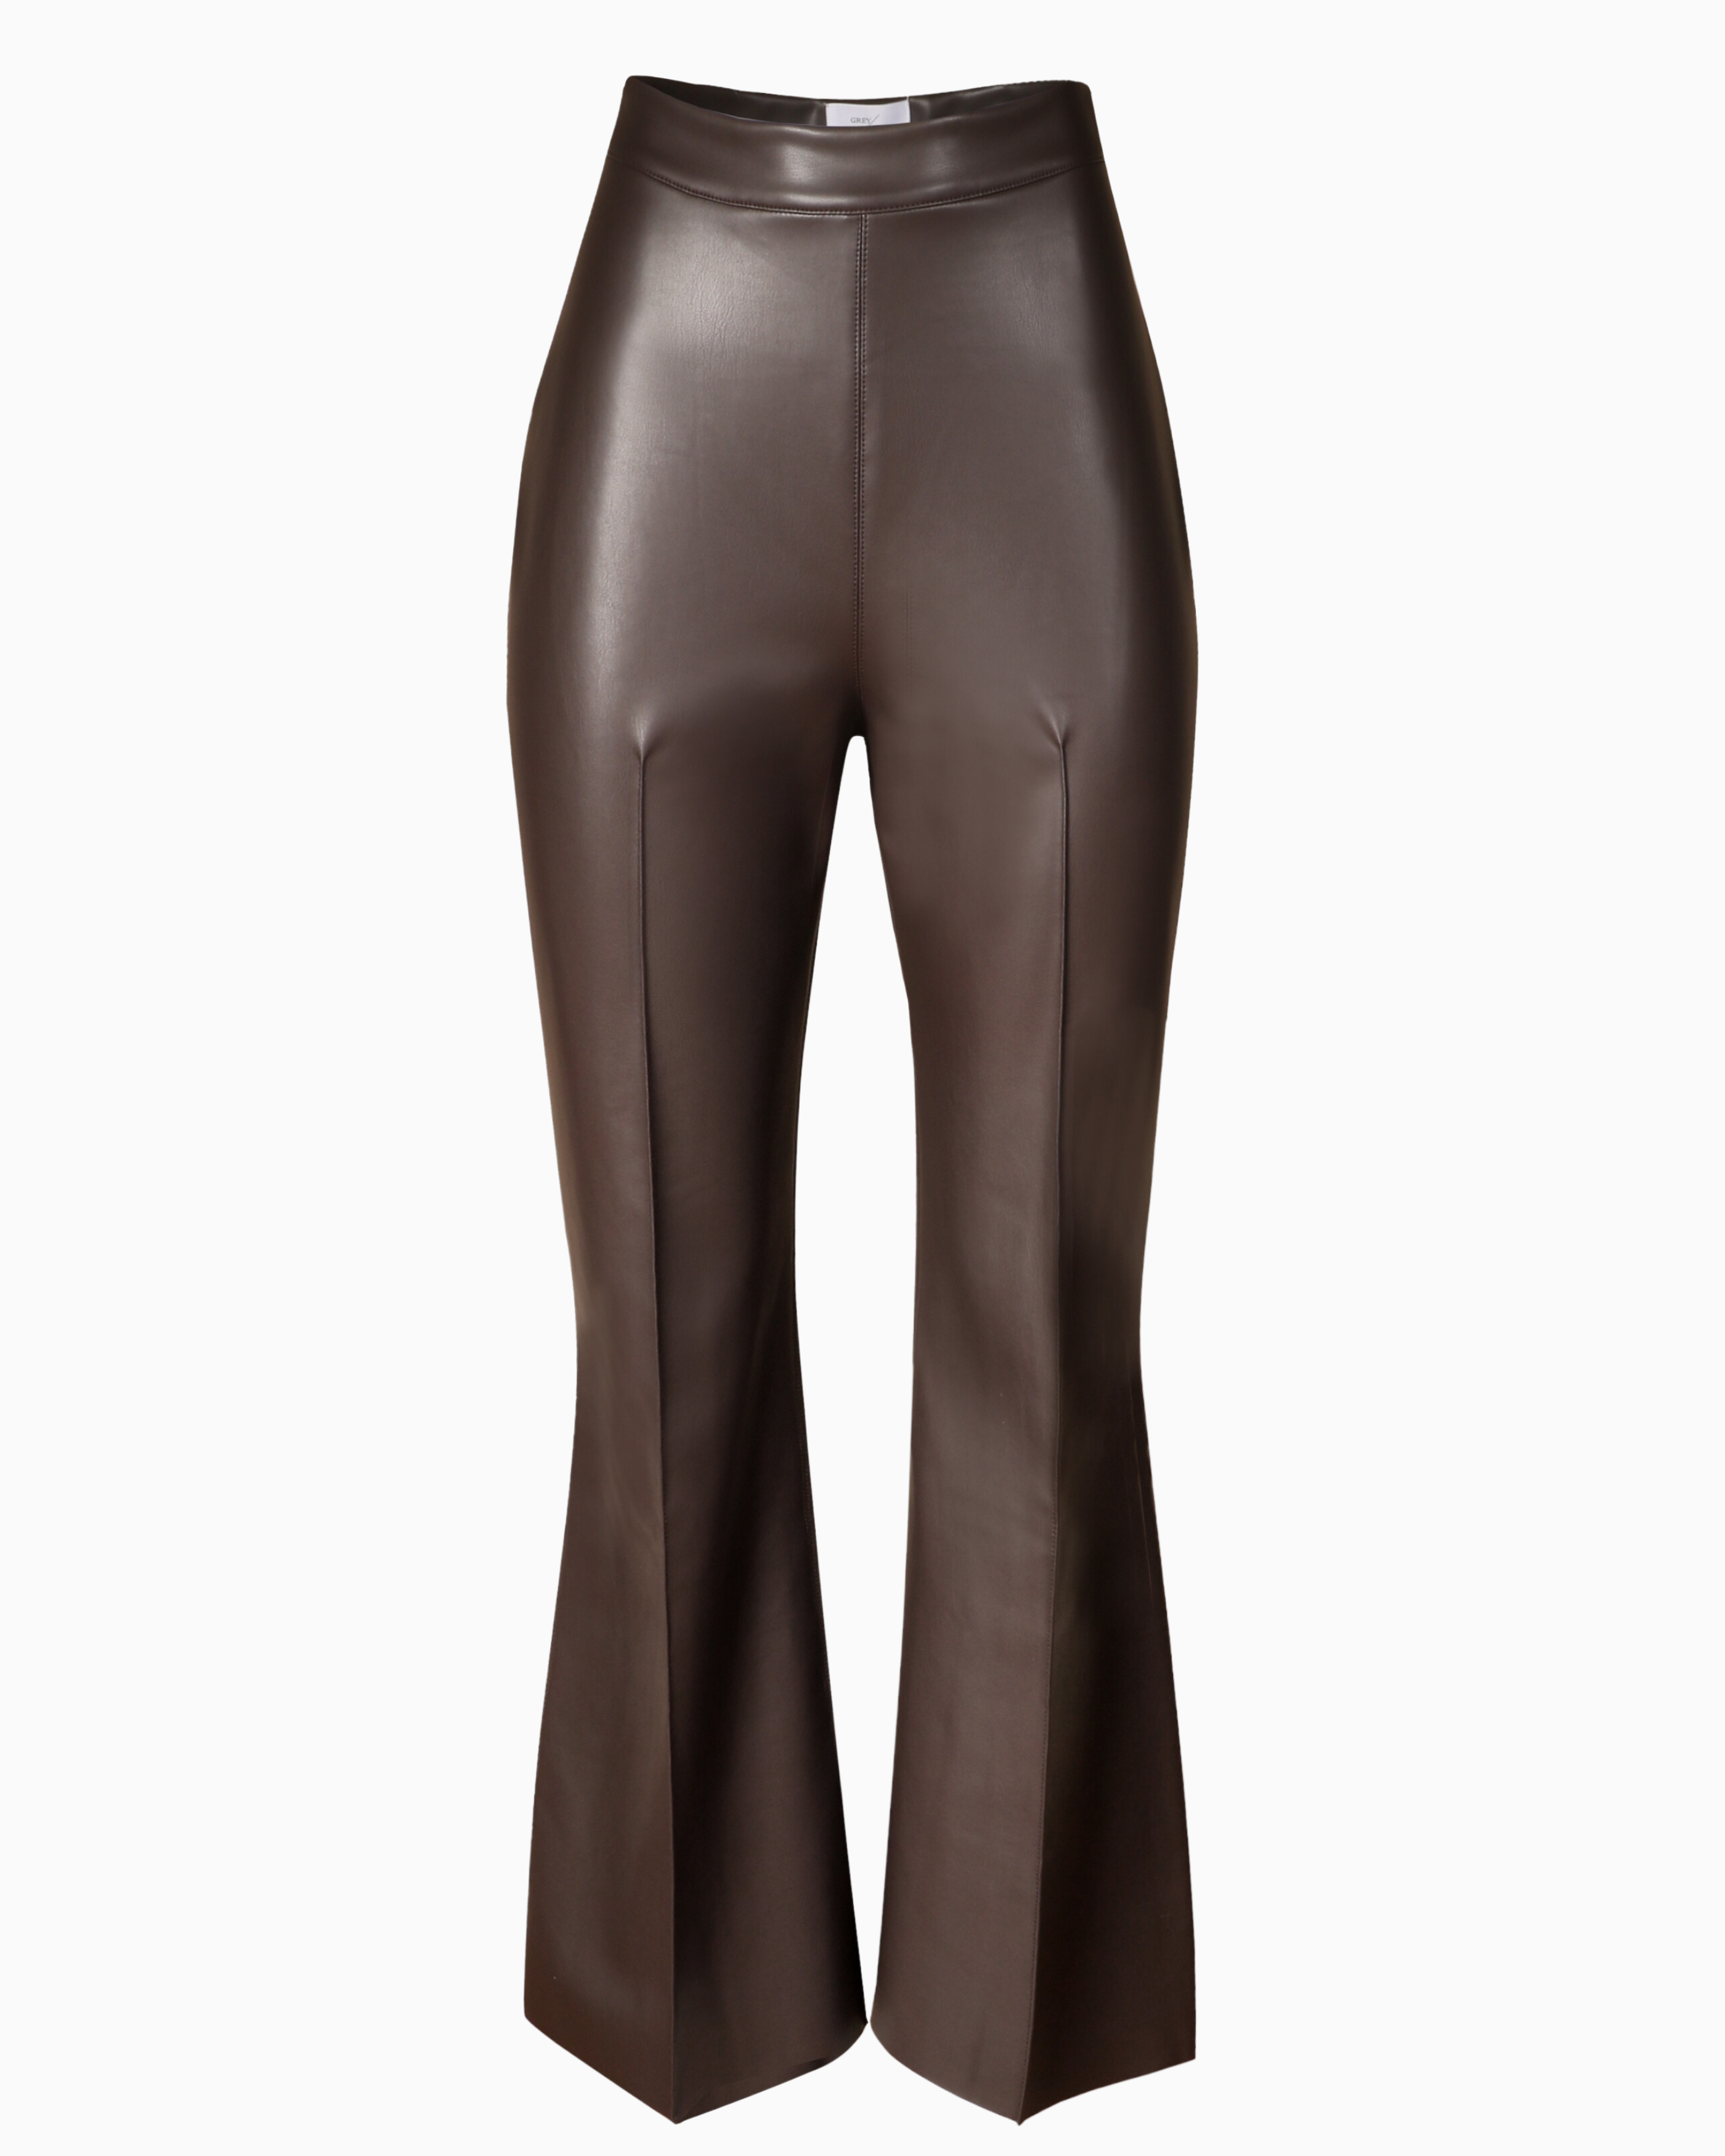 Grey Ven Porterfield Leather Pant in Espresso